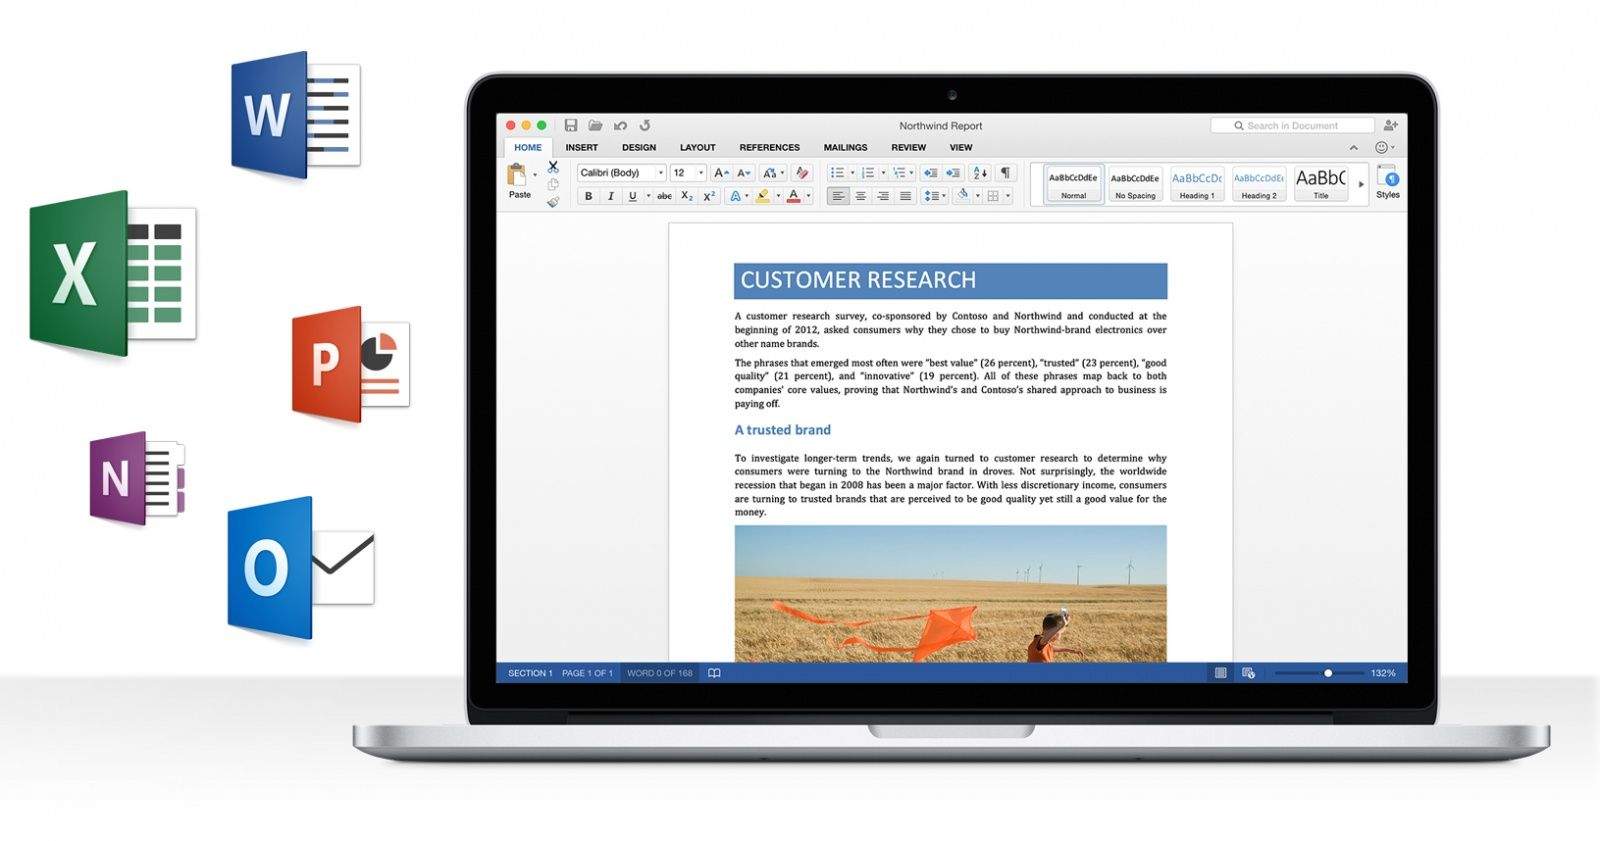 microsoft powerpoint for mac 2016